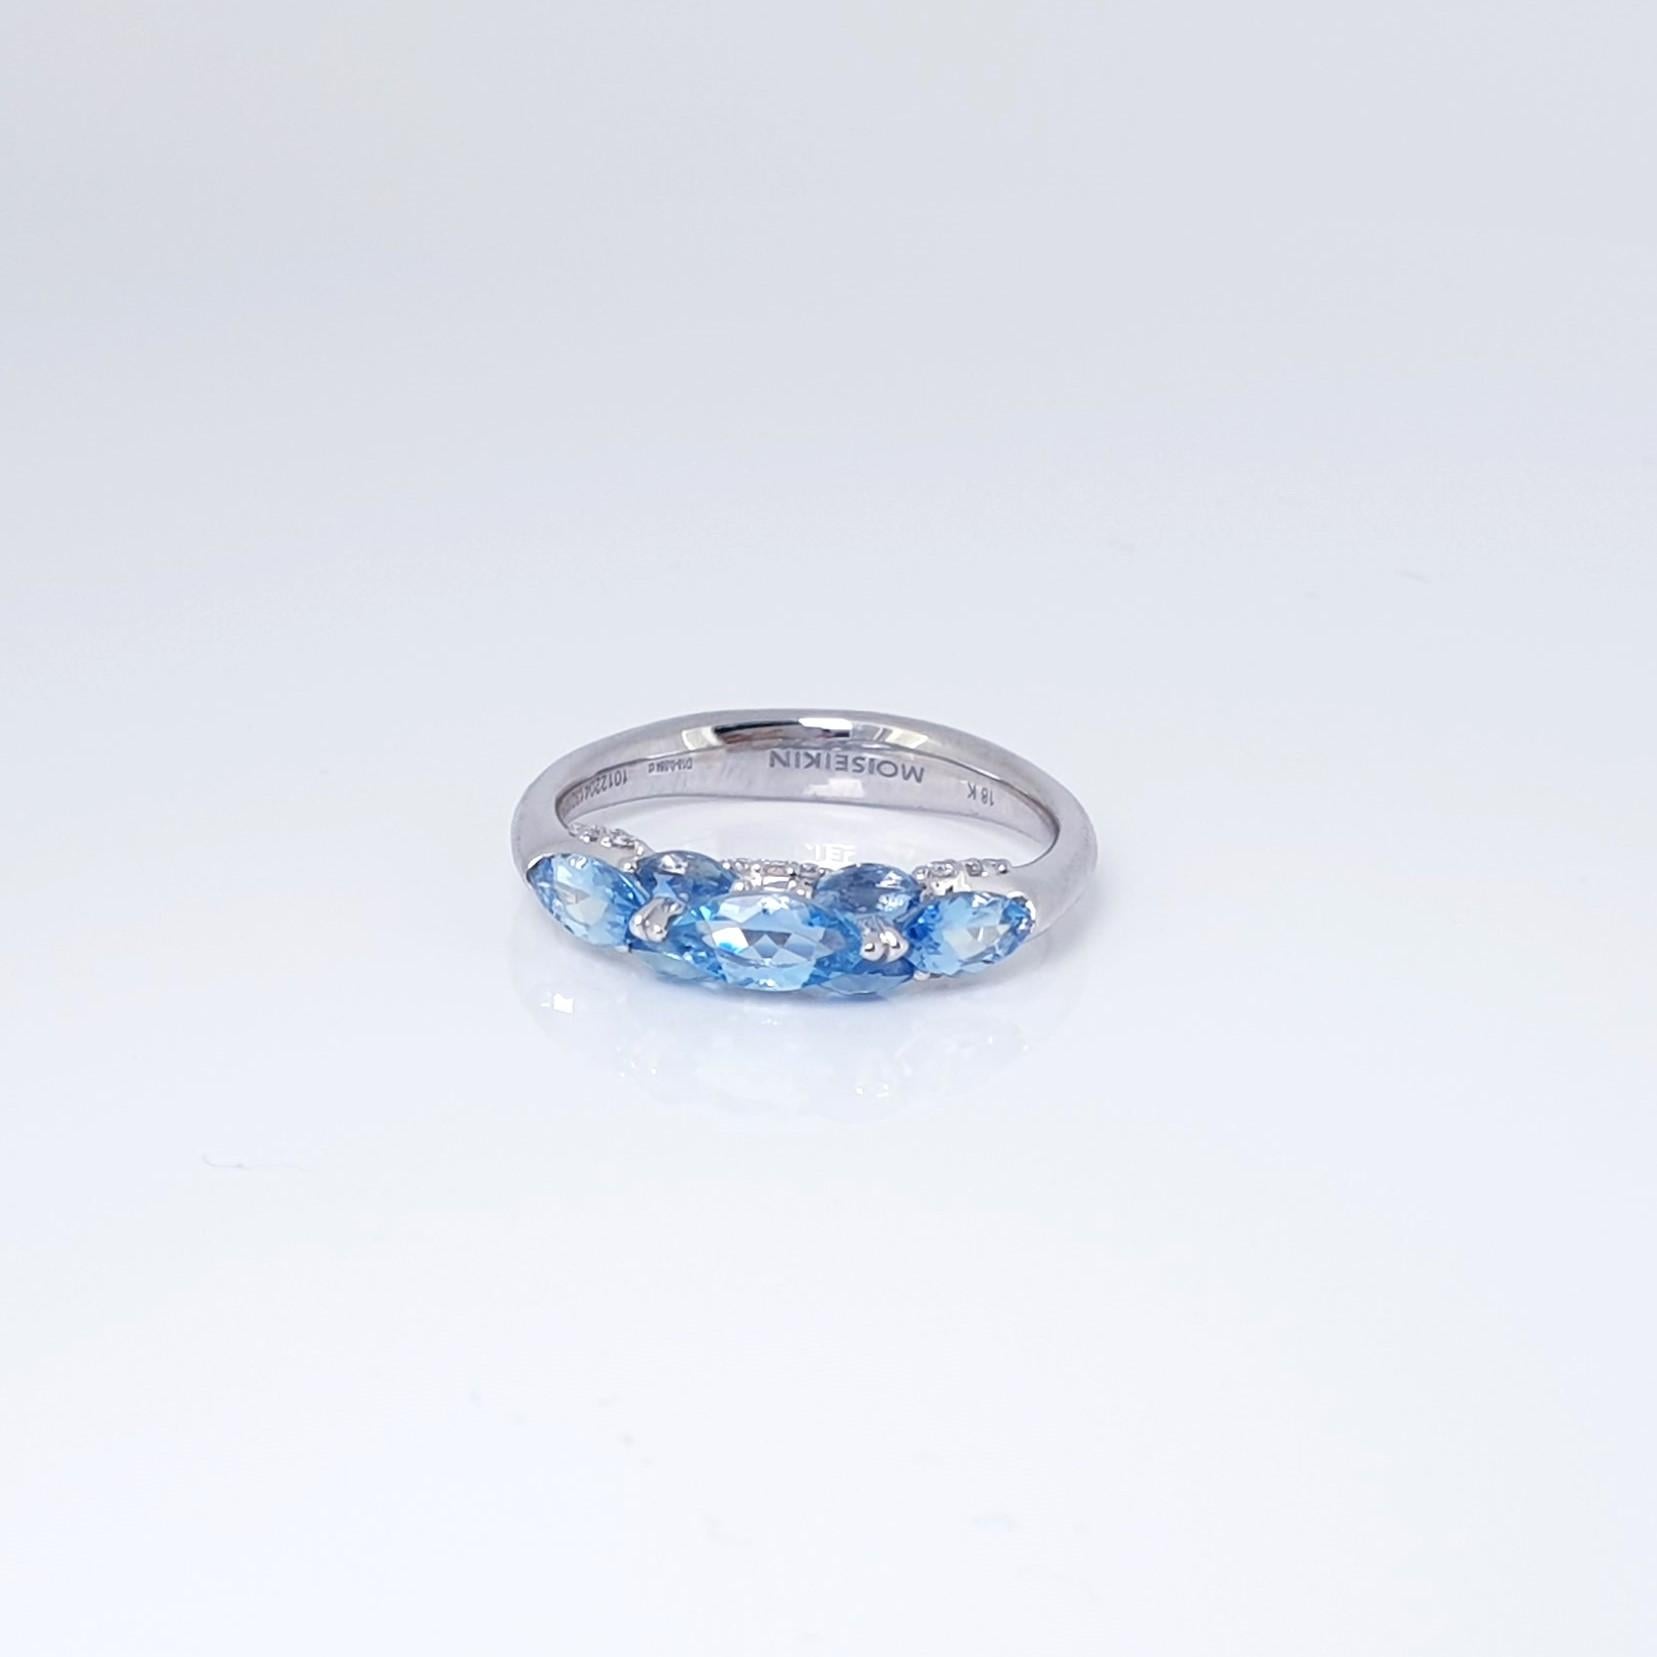 The exquisite elegant ring from the MOISEIKIN's Harmony of Water collection is made of Santa Maria Aquamarines and shimmering diamonds.
The lightful harmony of aquamarines mounted in traditional and unique reverse settings creates intensive energy